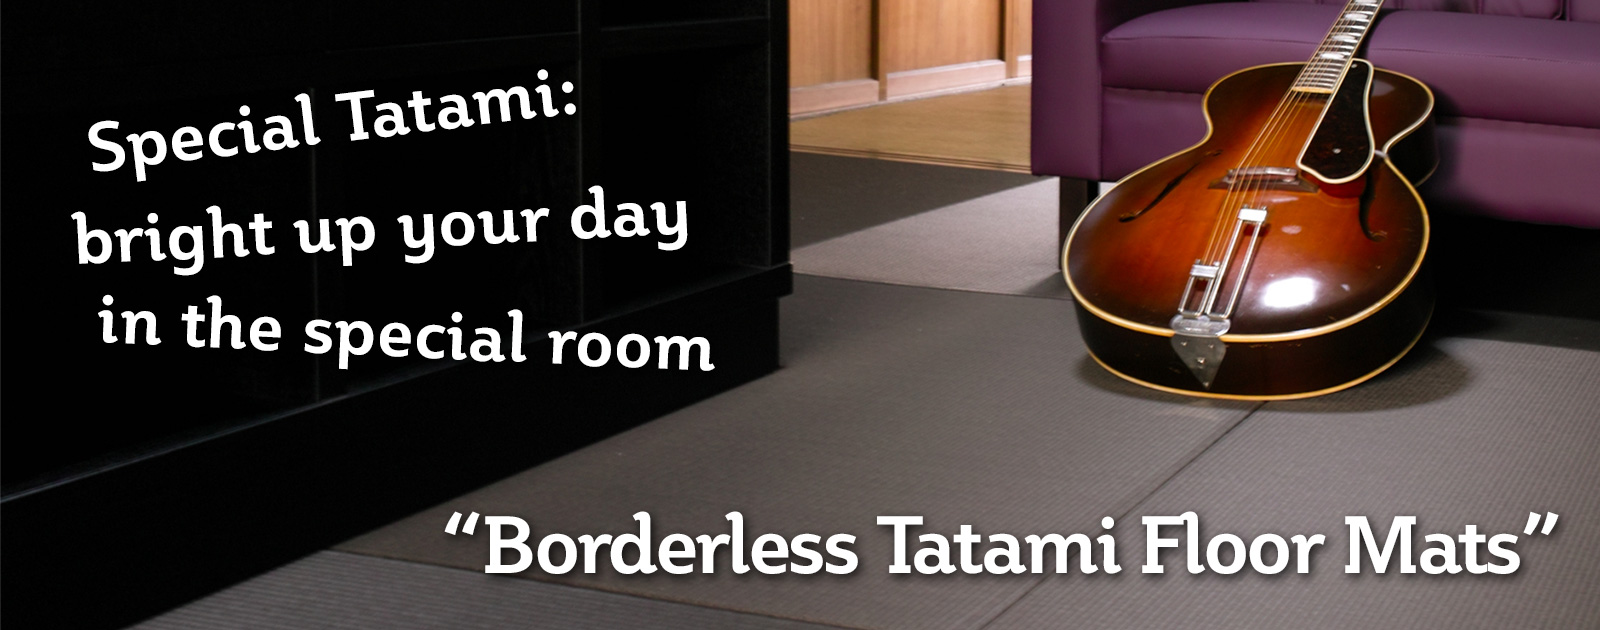 Special Tatami: bright up your day in the special room Borderless Tatami Floor Mats